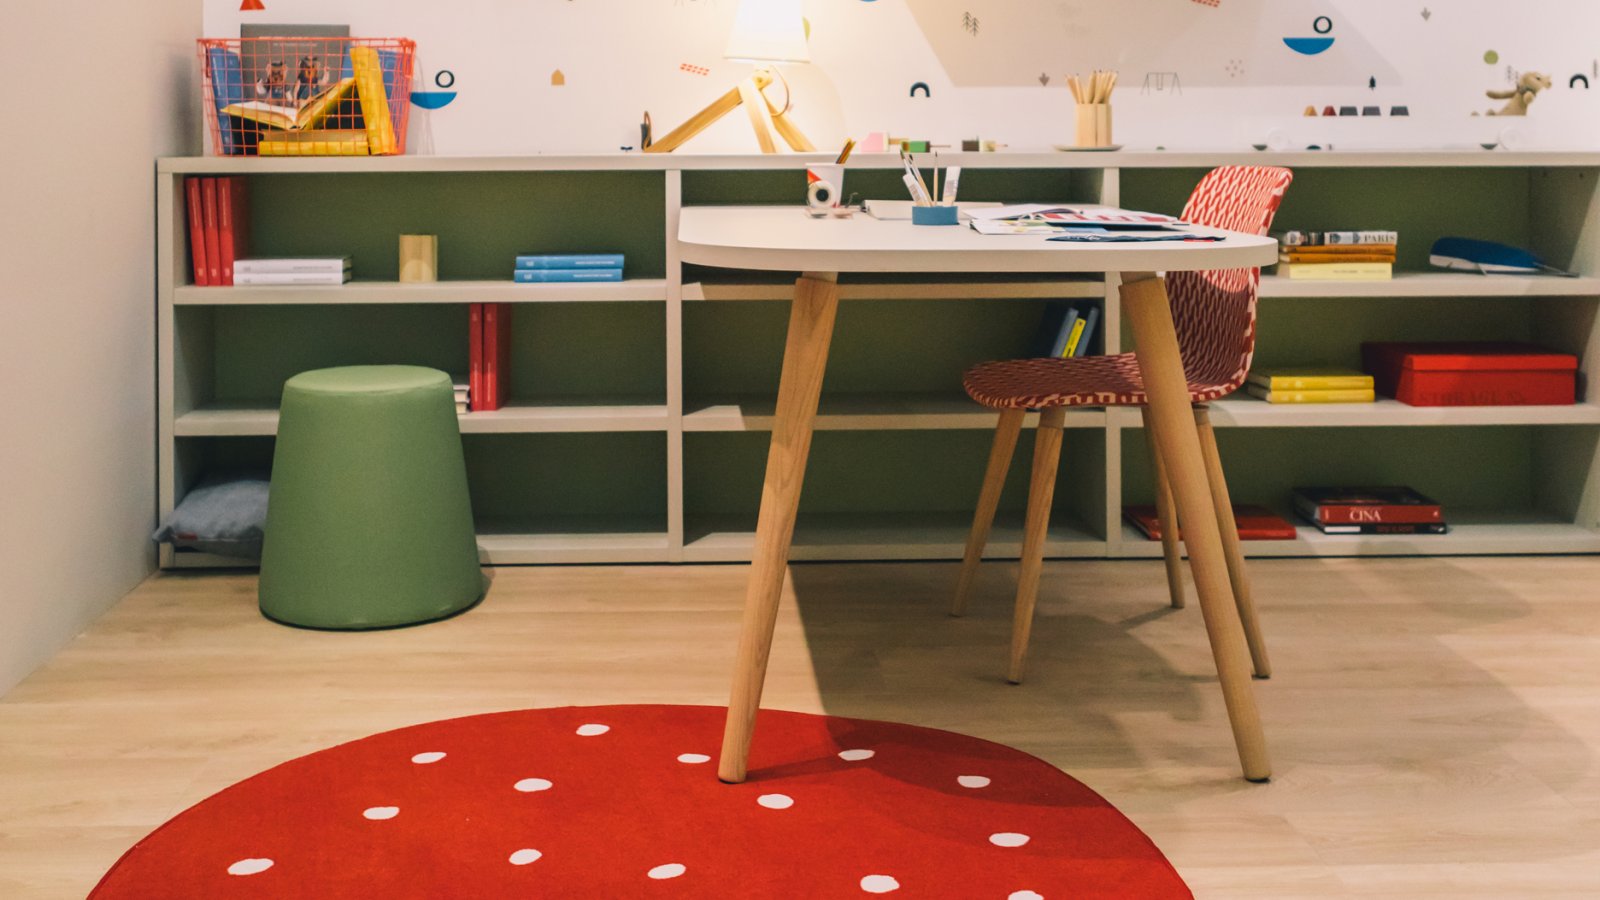 Kids collections and Teens spaces at Hábitat Valencia fair 2018